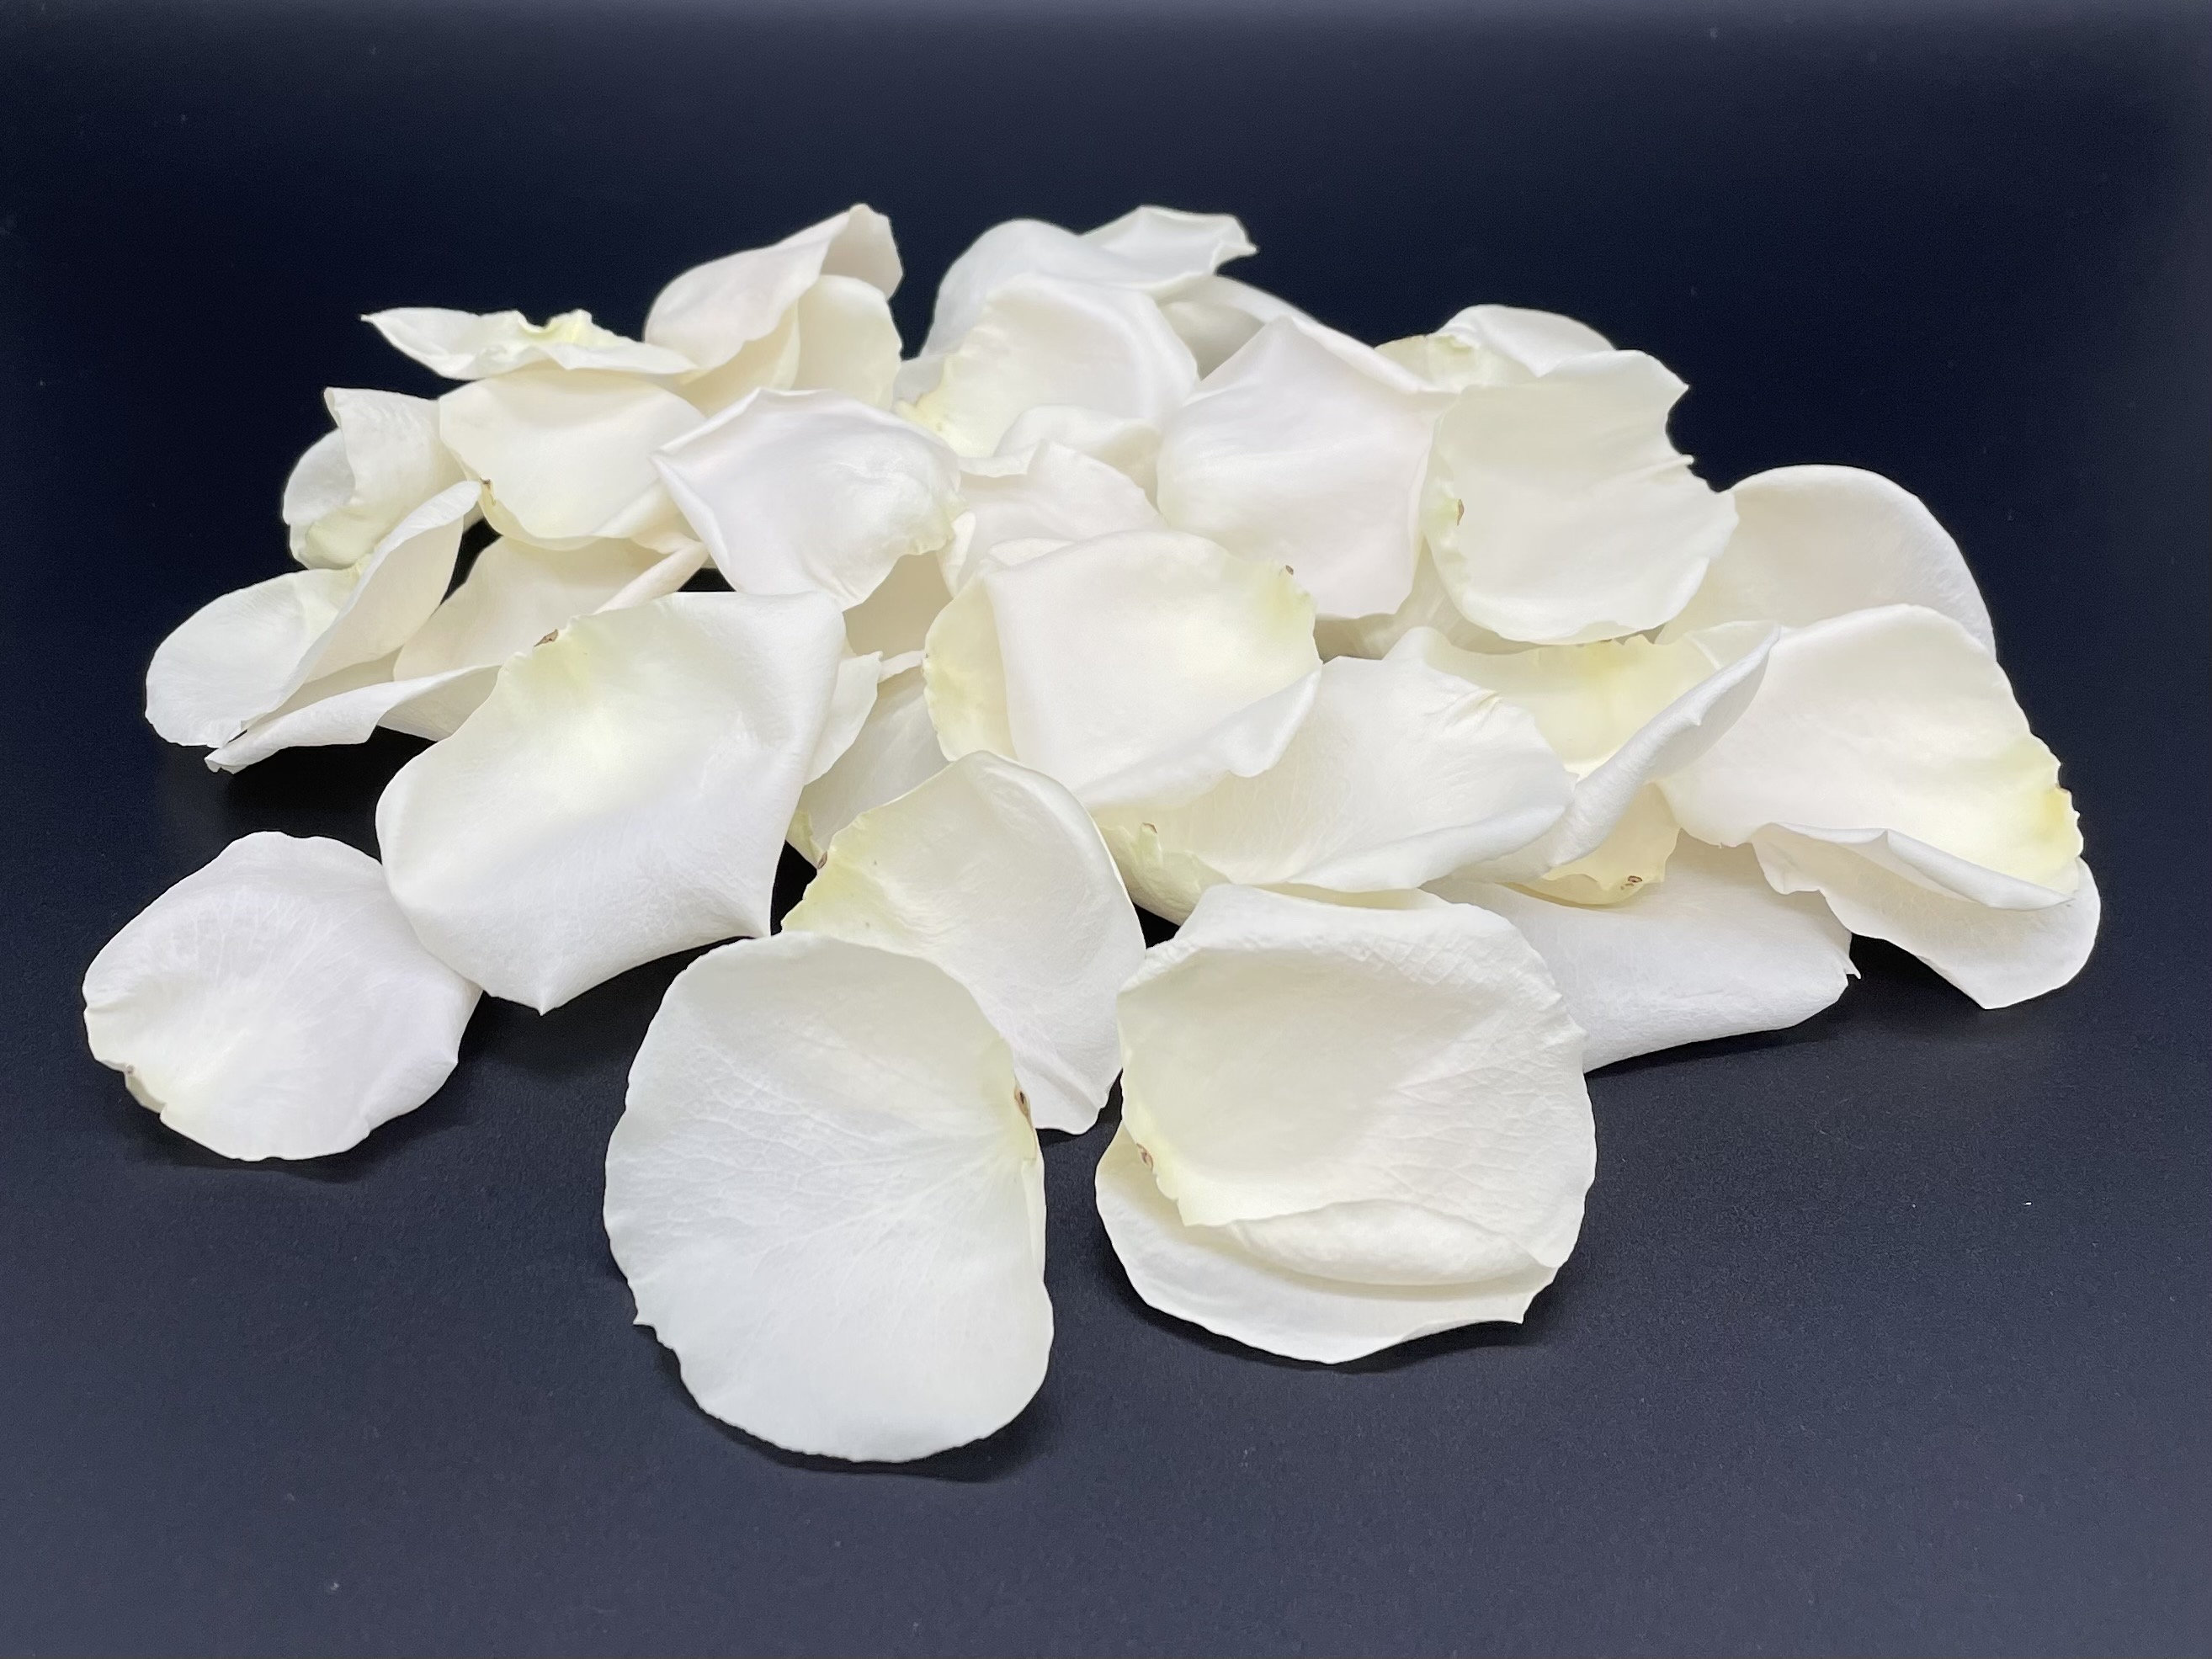 Handmade White Paper with Real Flower Petals and Deckle Edge